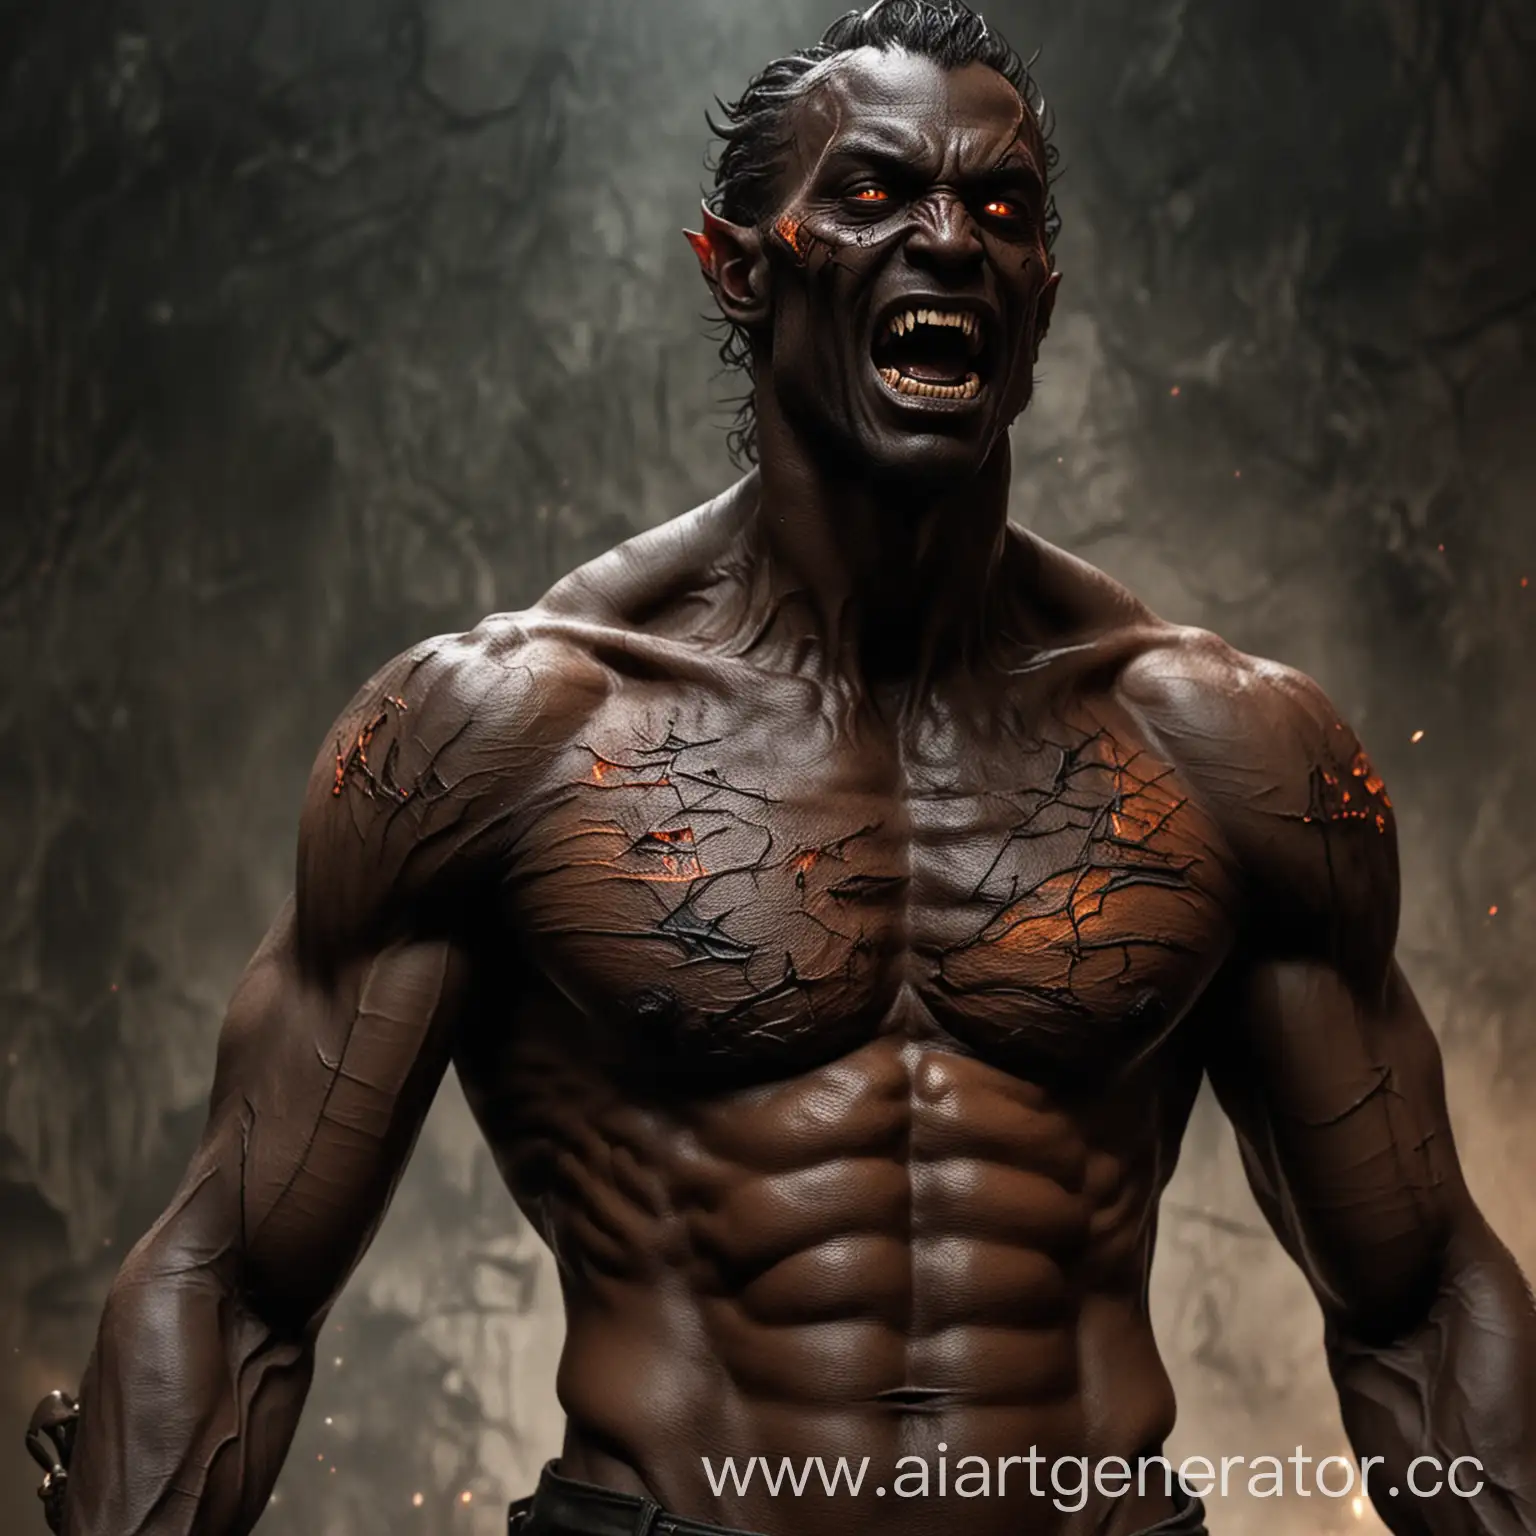 Sinister-Demon-Valzoth-with-Glowing-Eyes-and-Muscular-Build